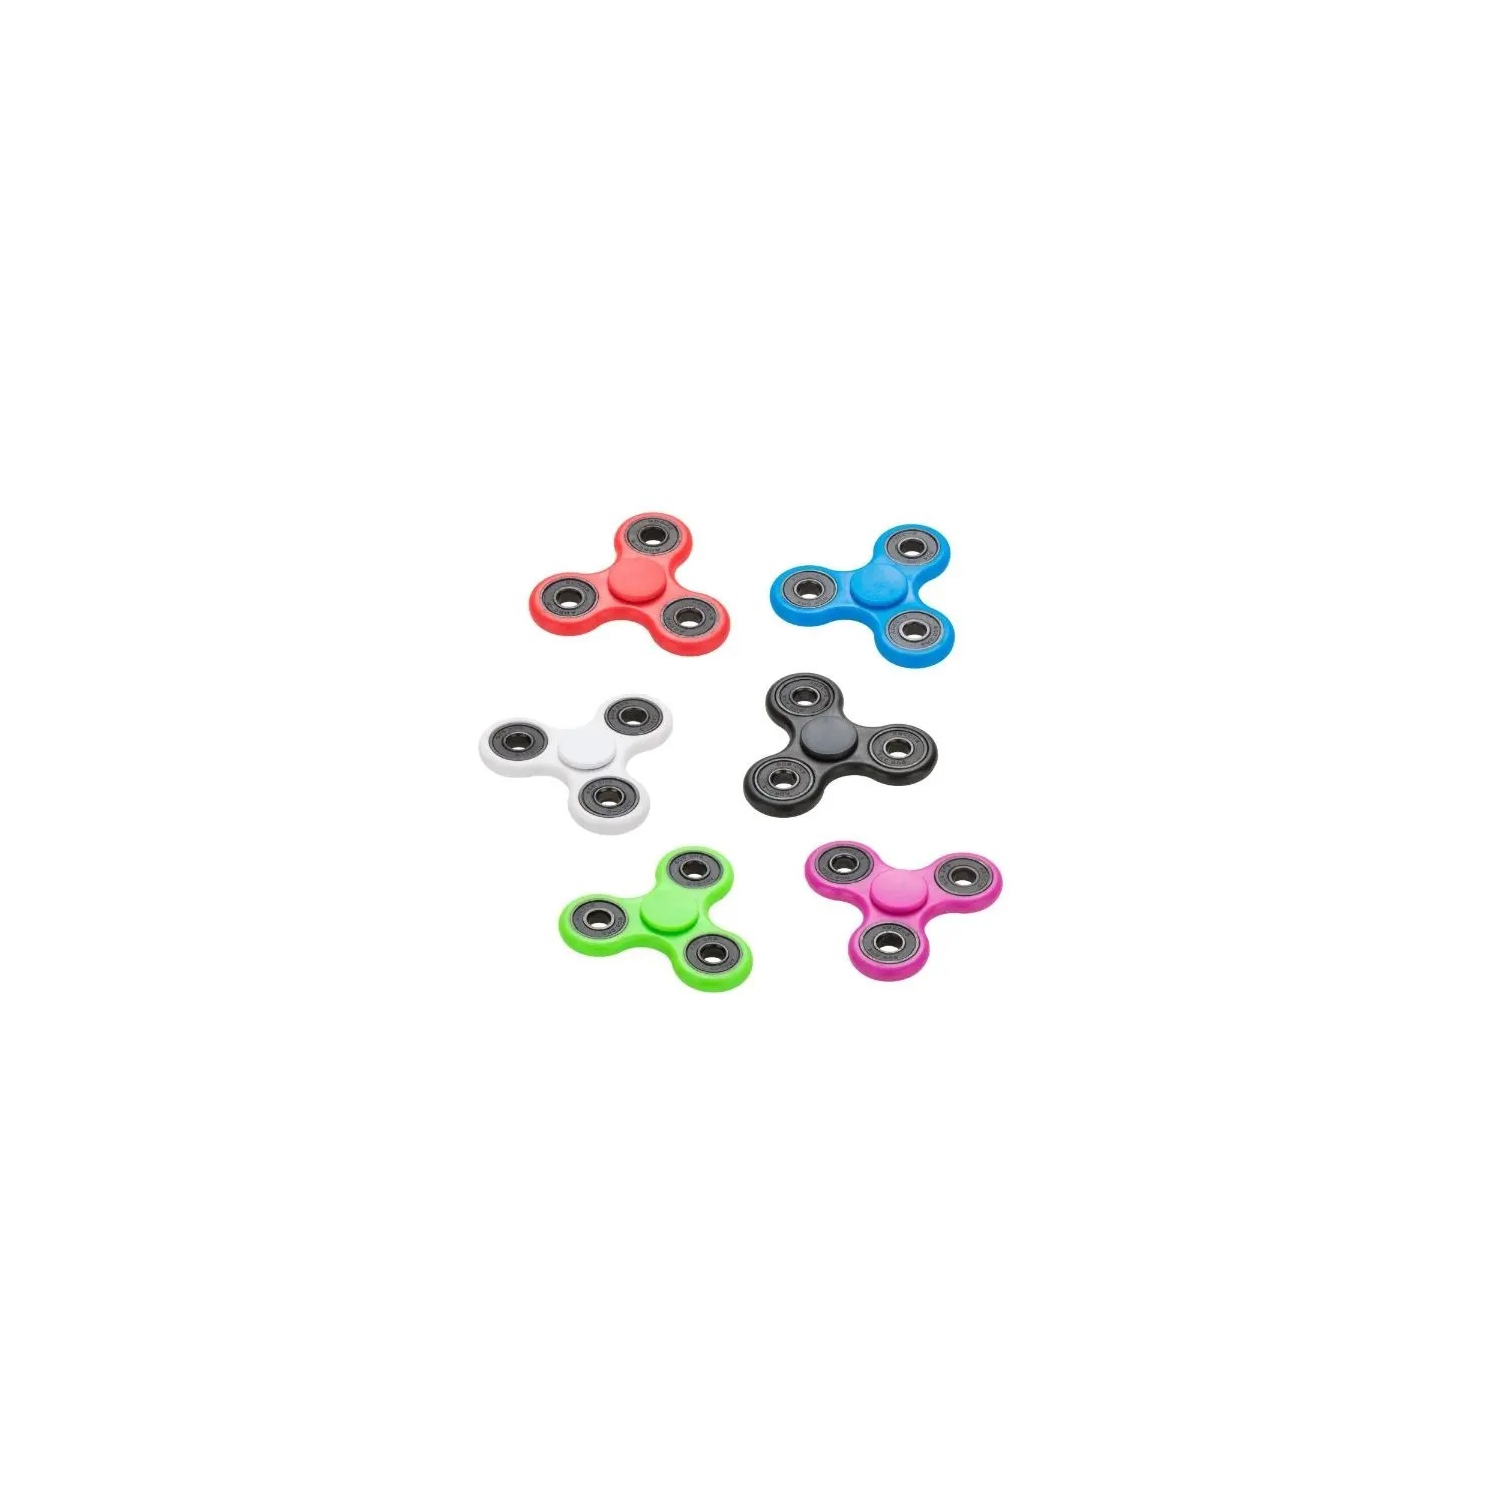 Tradeopia Fidget Spinner (10 Pack) – Style & Colour May Vary